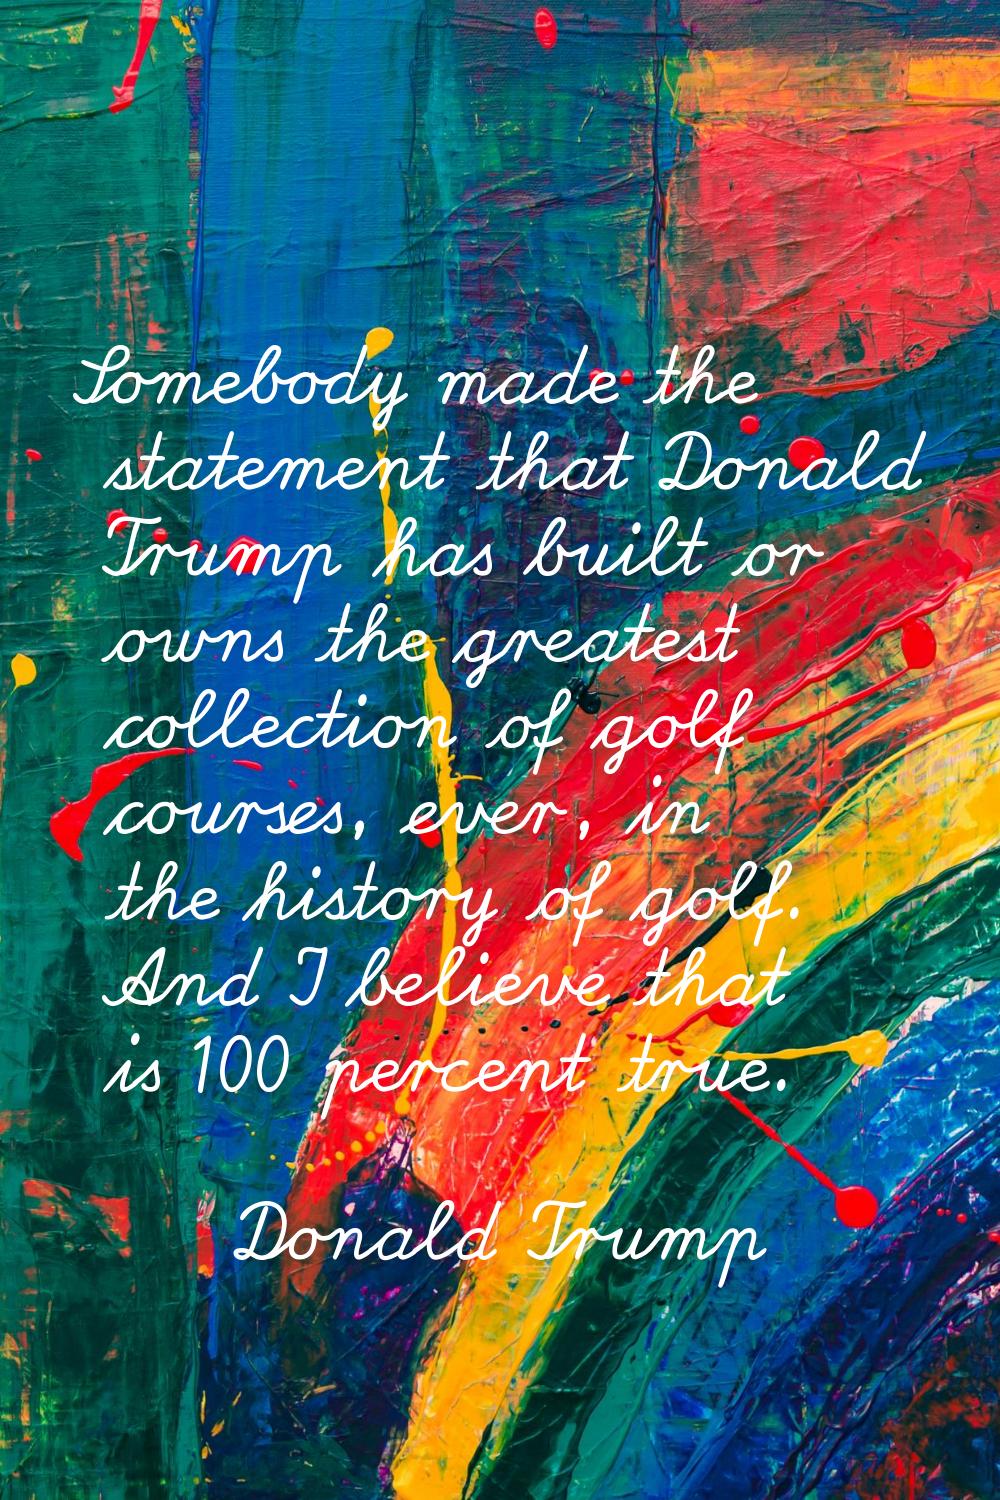 Somebody made the statement that Donald Trump has built or owns the greatest collection of golf cou